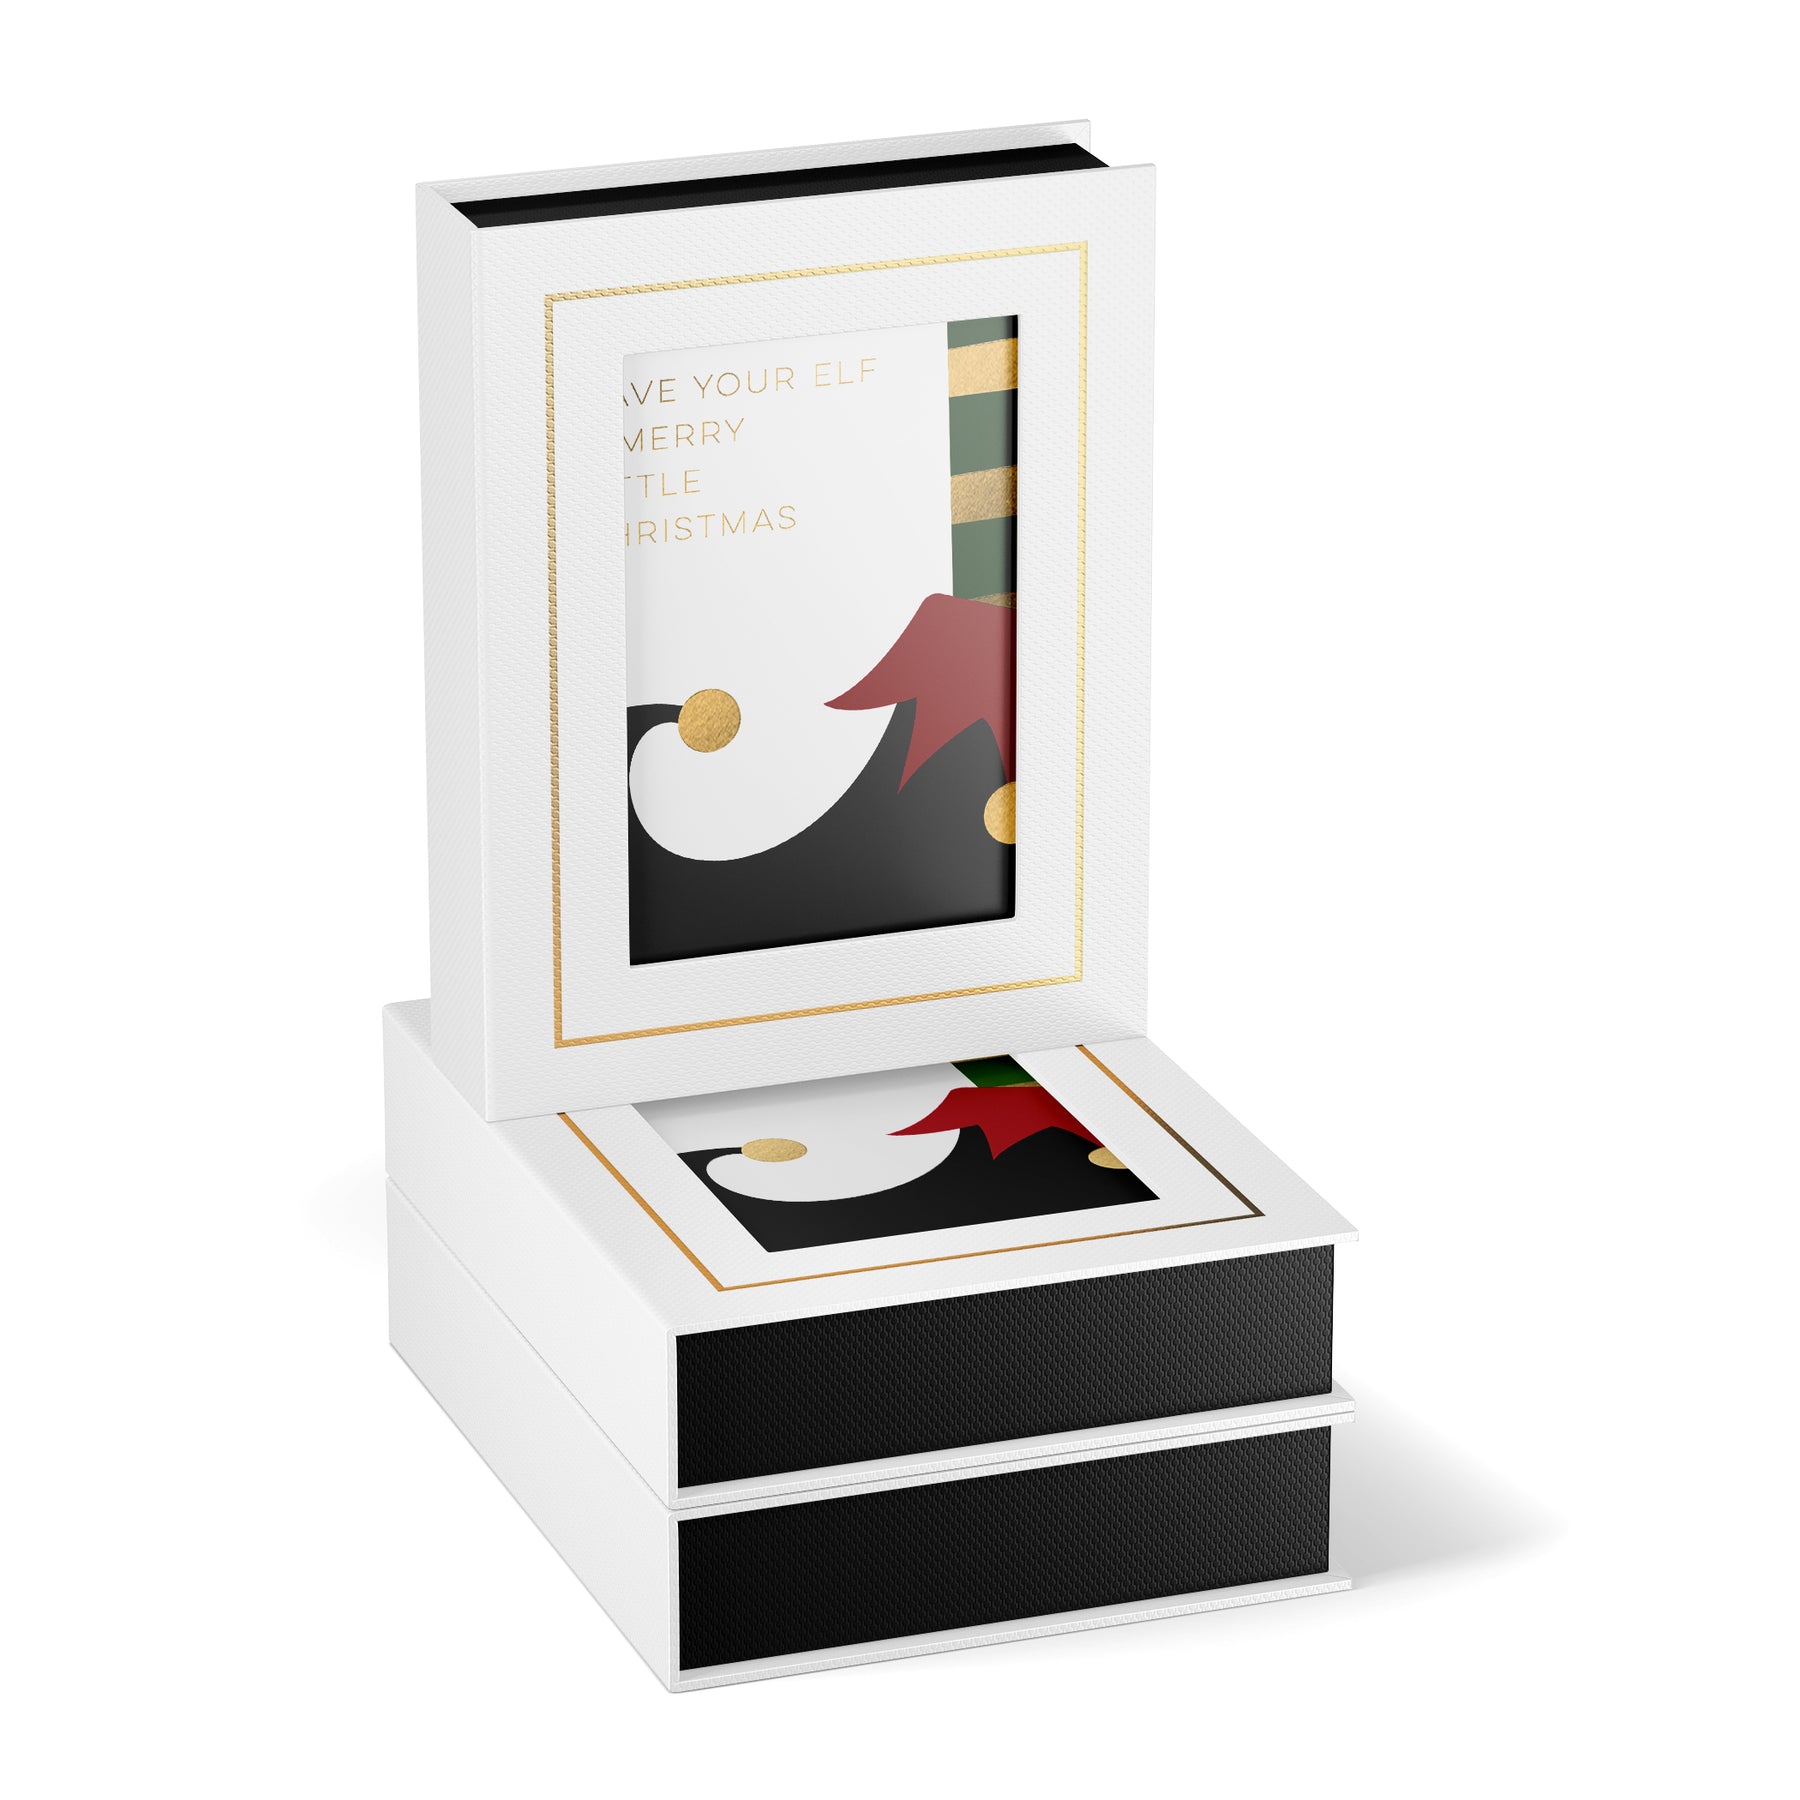 Merry Elf Boxed Christmas Cards by Fine Moments